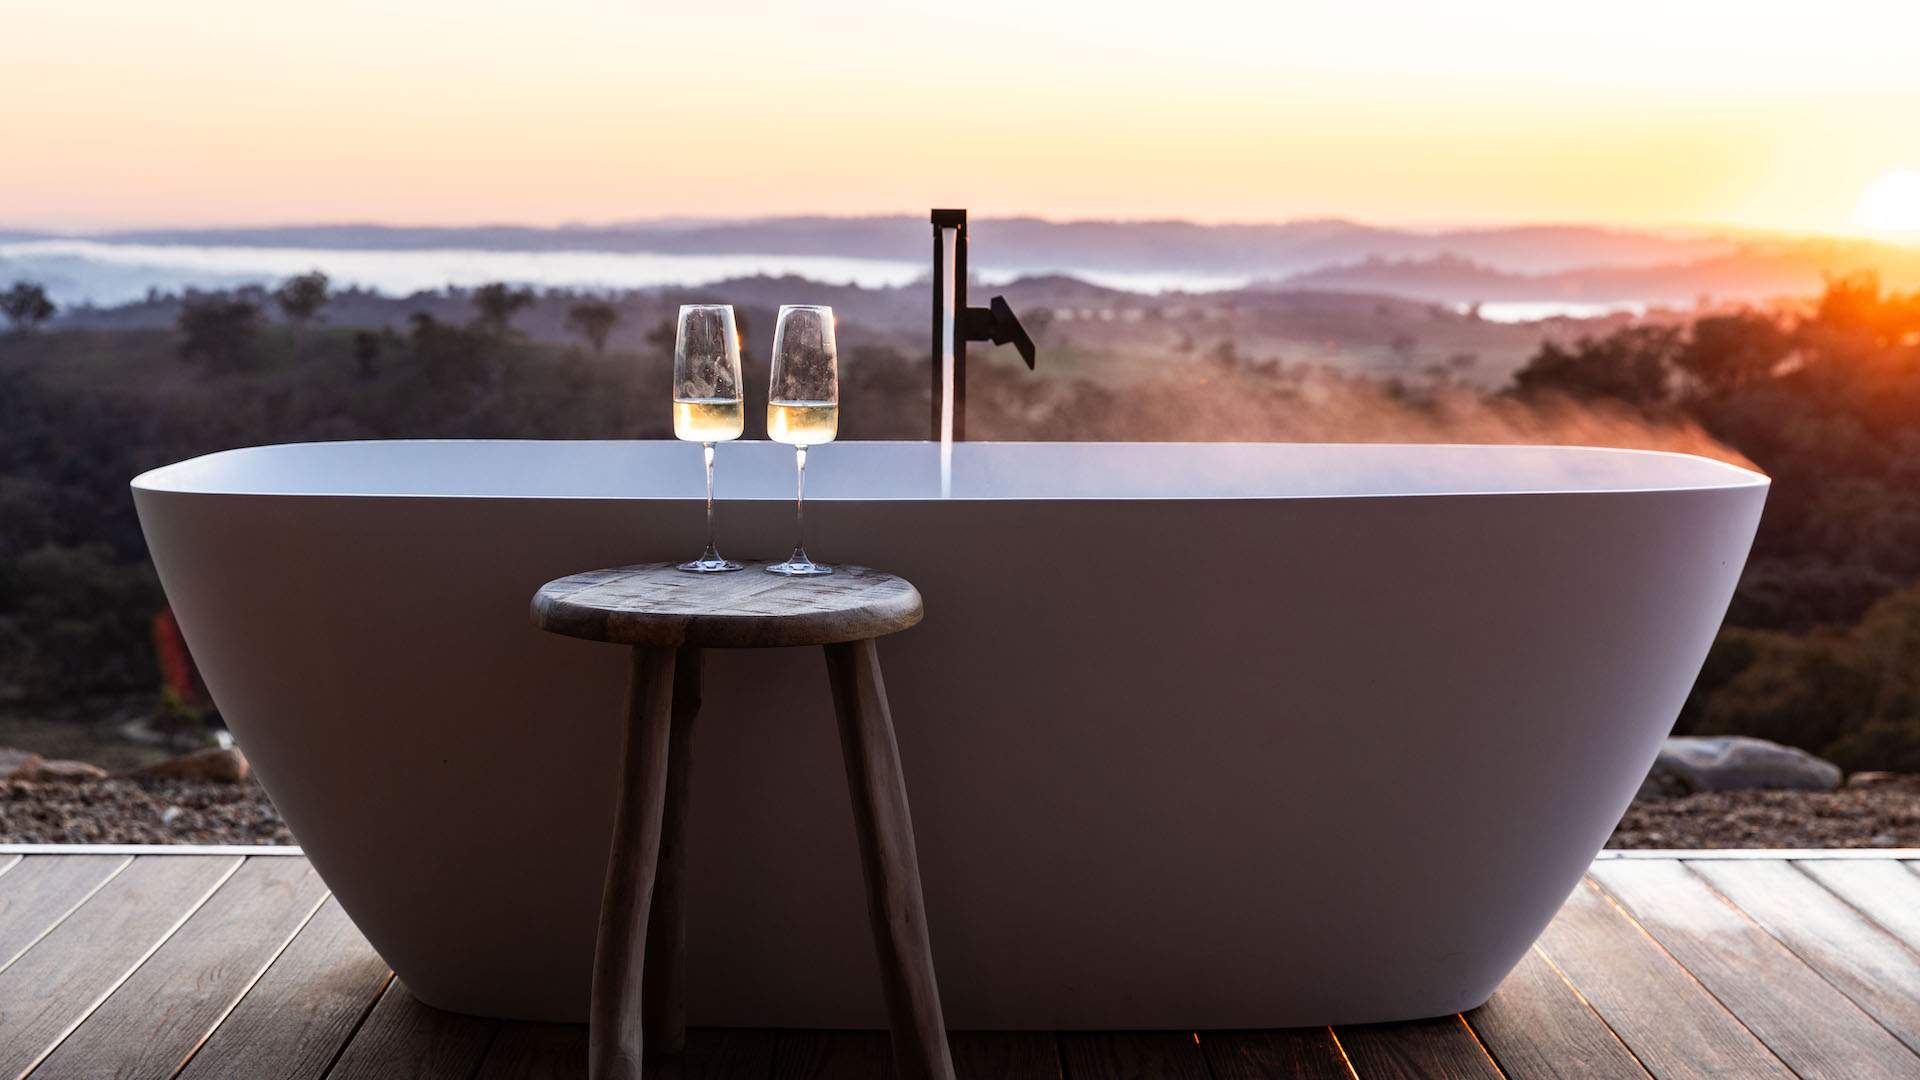 Sierra Escape Has Just Added a Stunning Tiny House to Its Suite of Luxe Mudgee Accommodation